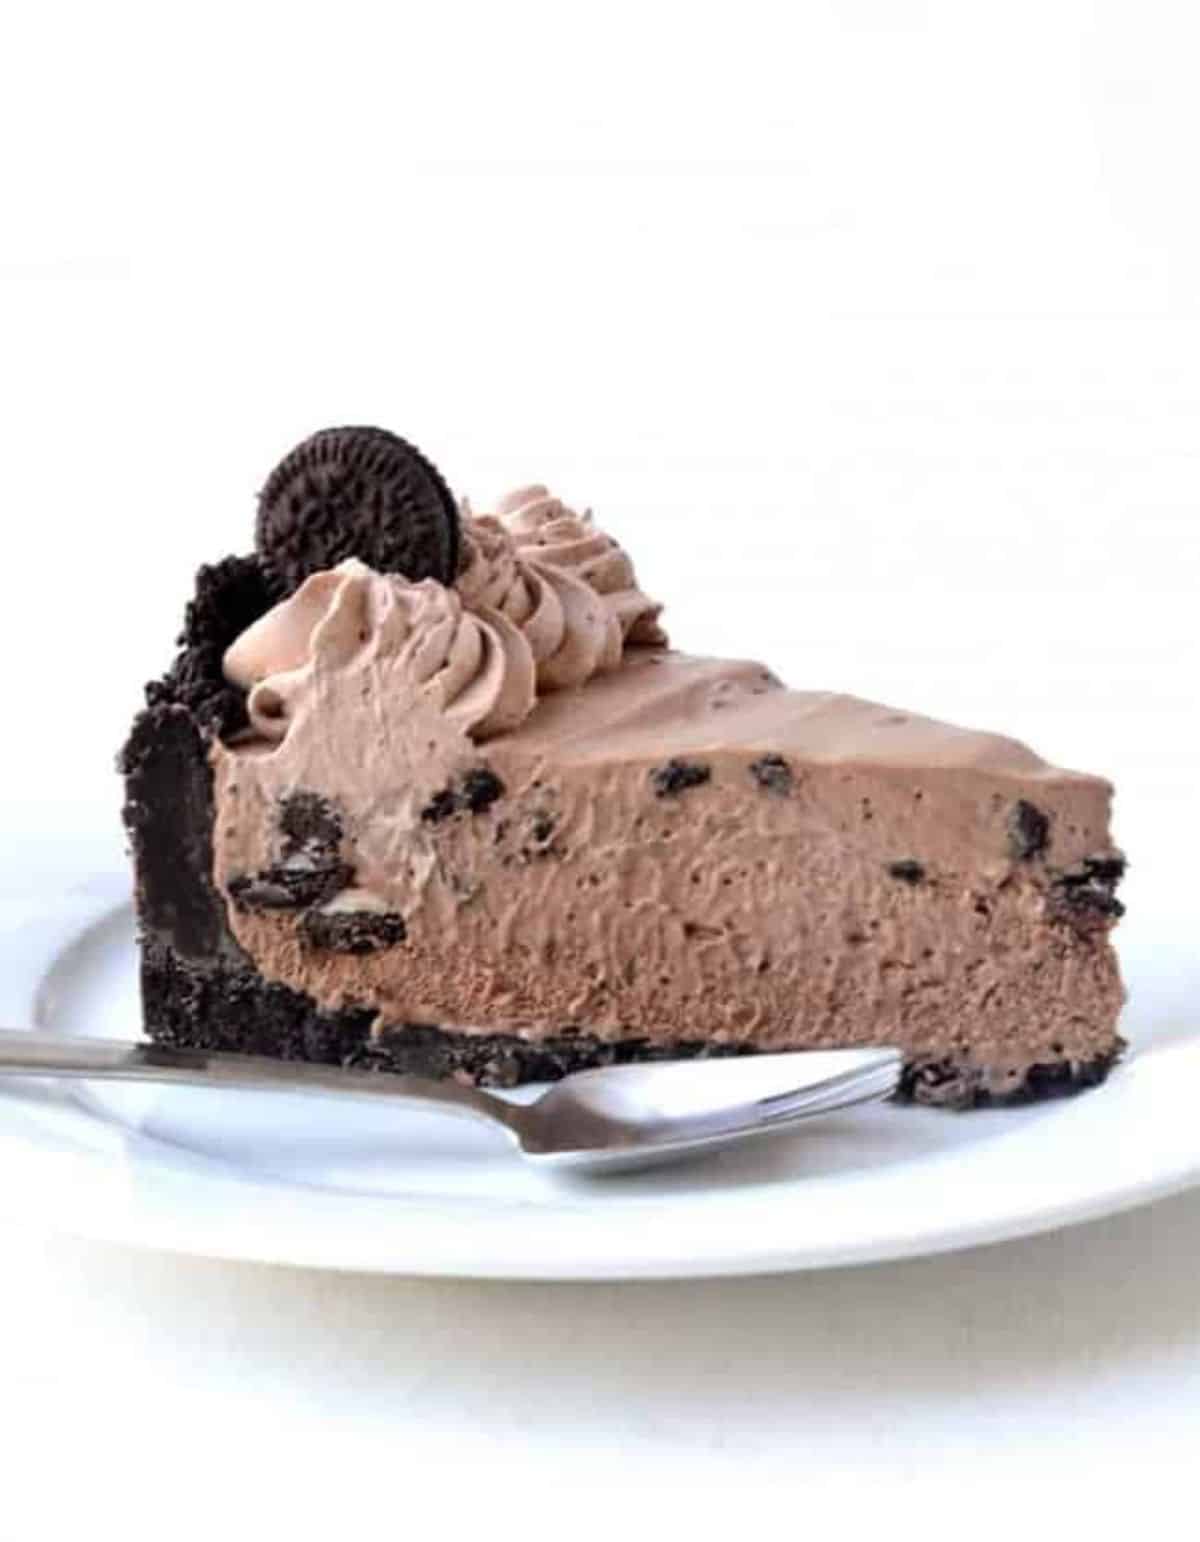 A piece of Oreo Ice Cream Pie on a white plate with a fork.